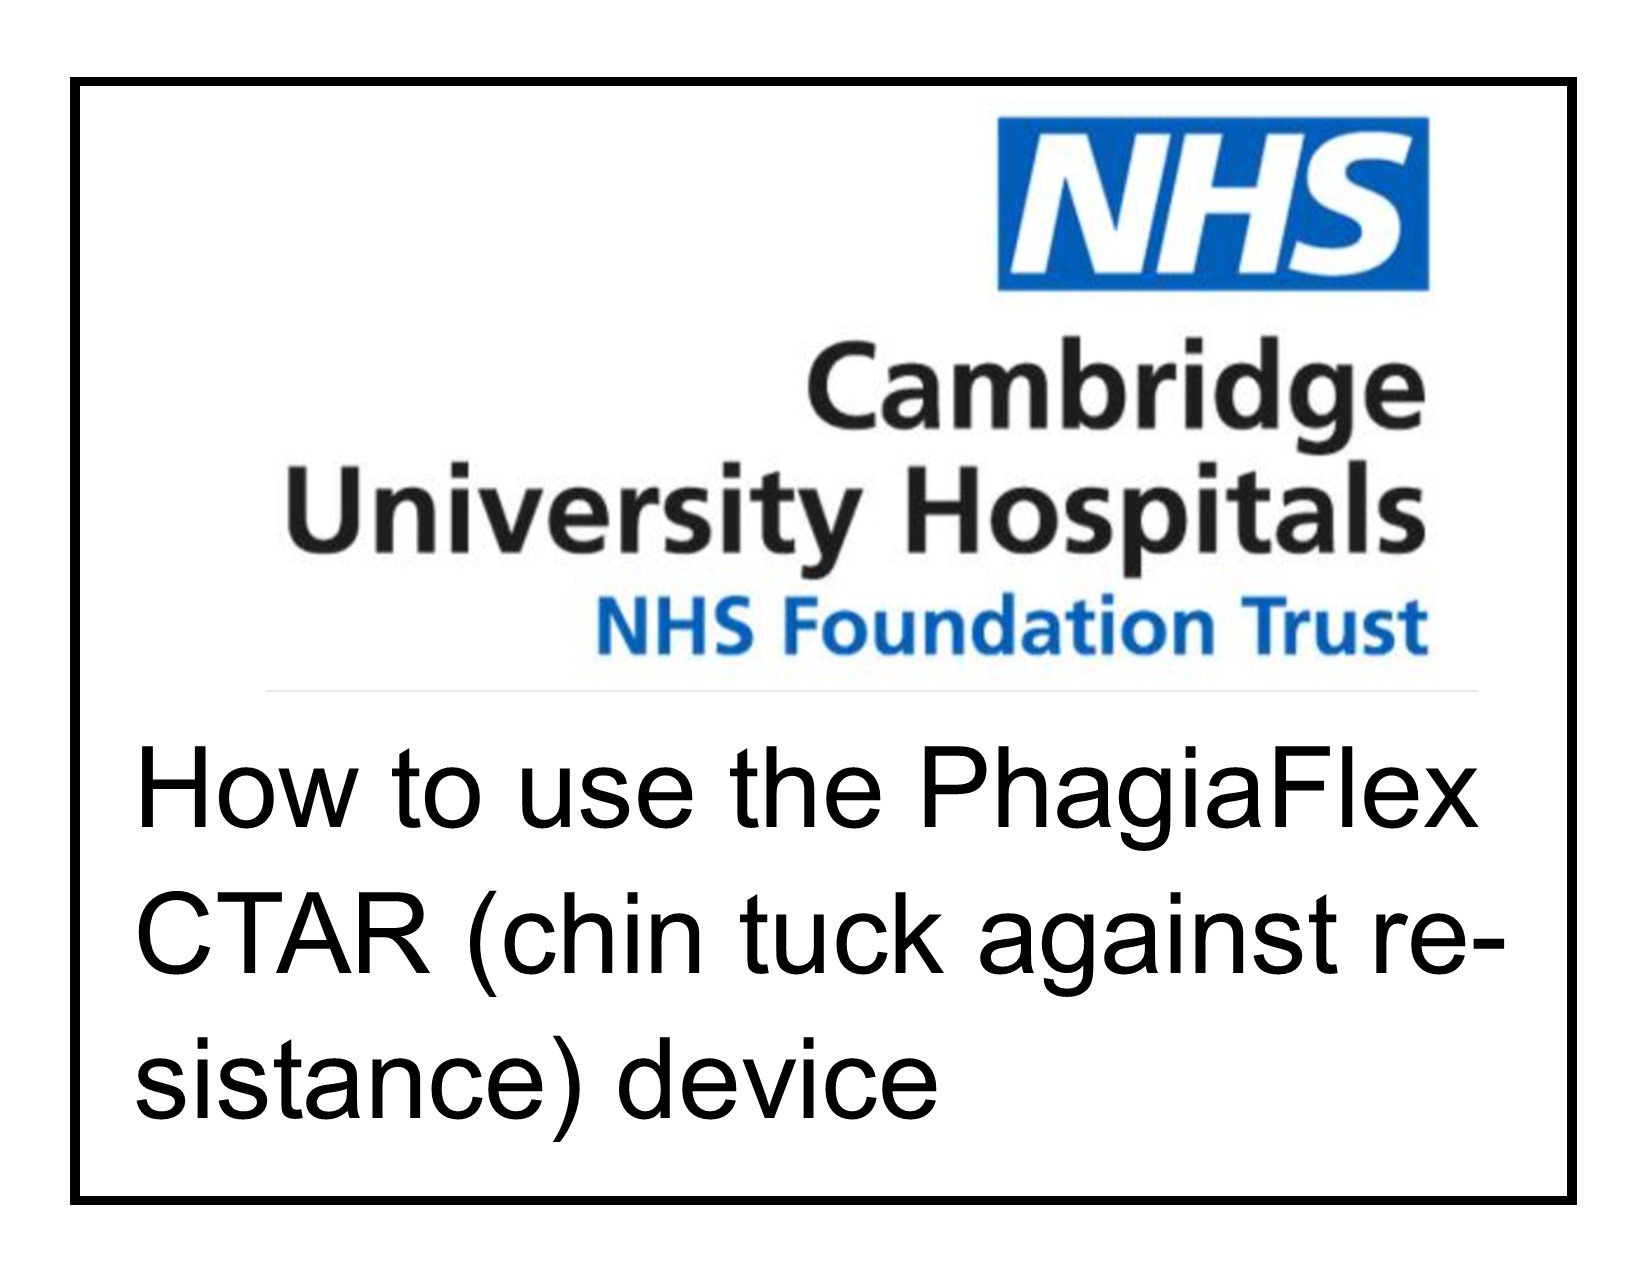 How to use the PhagiaFlex CTAR chin tuck against resistance device